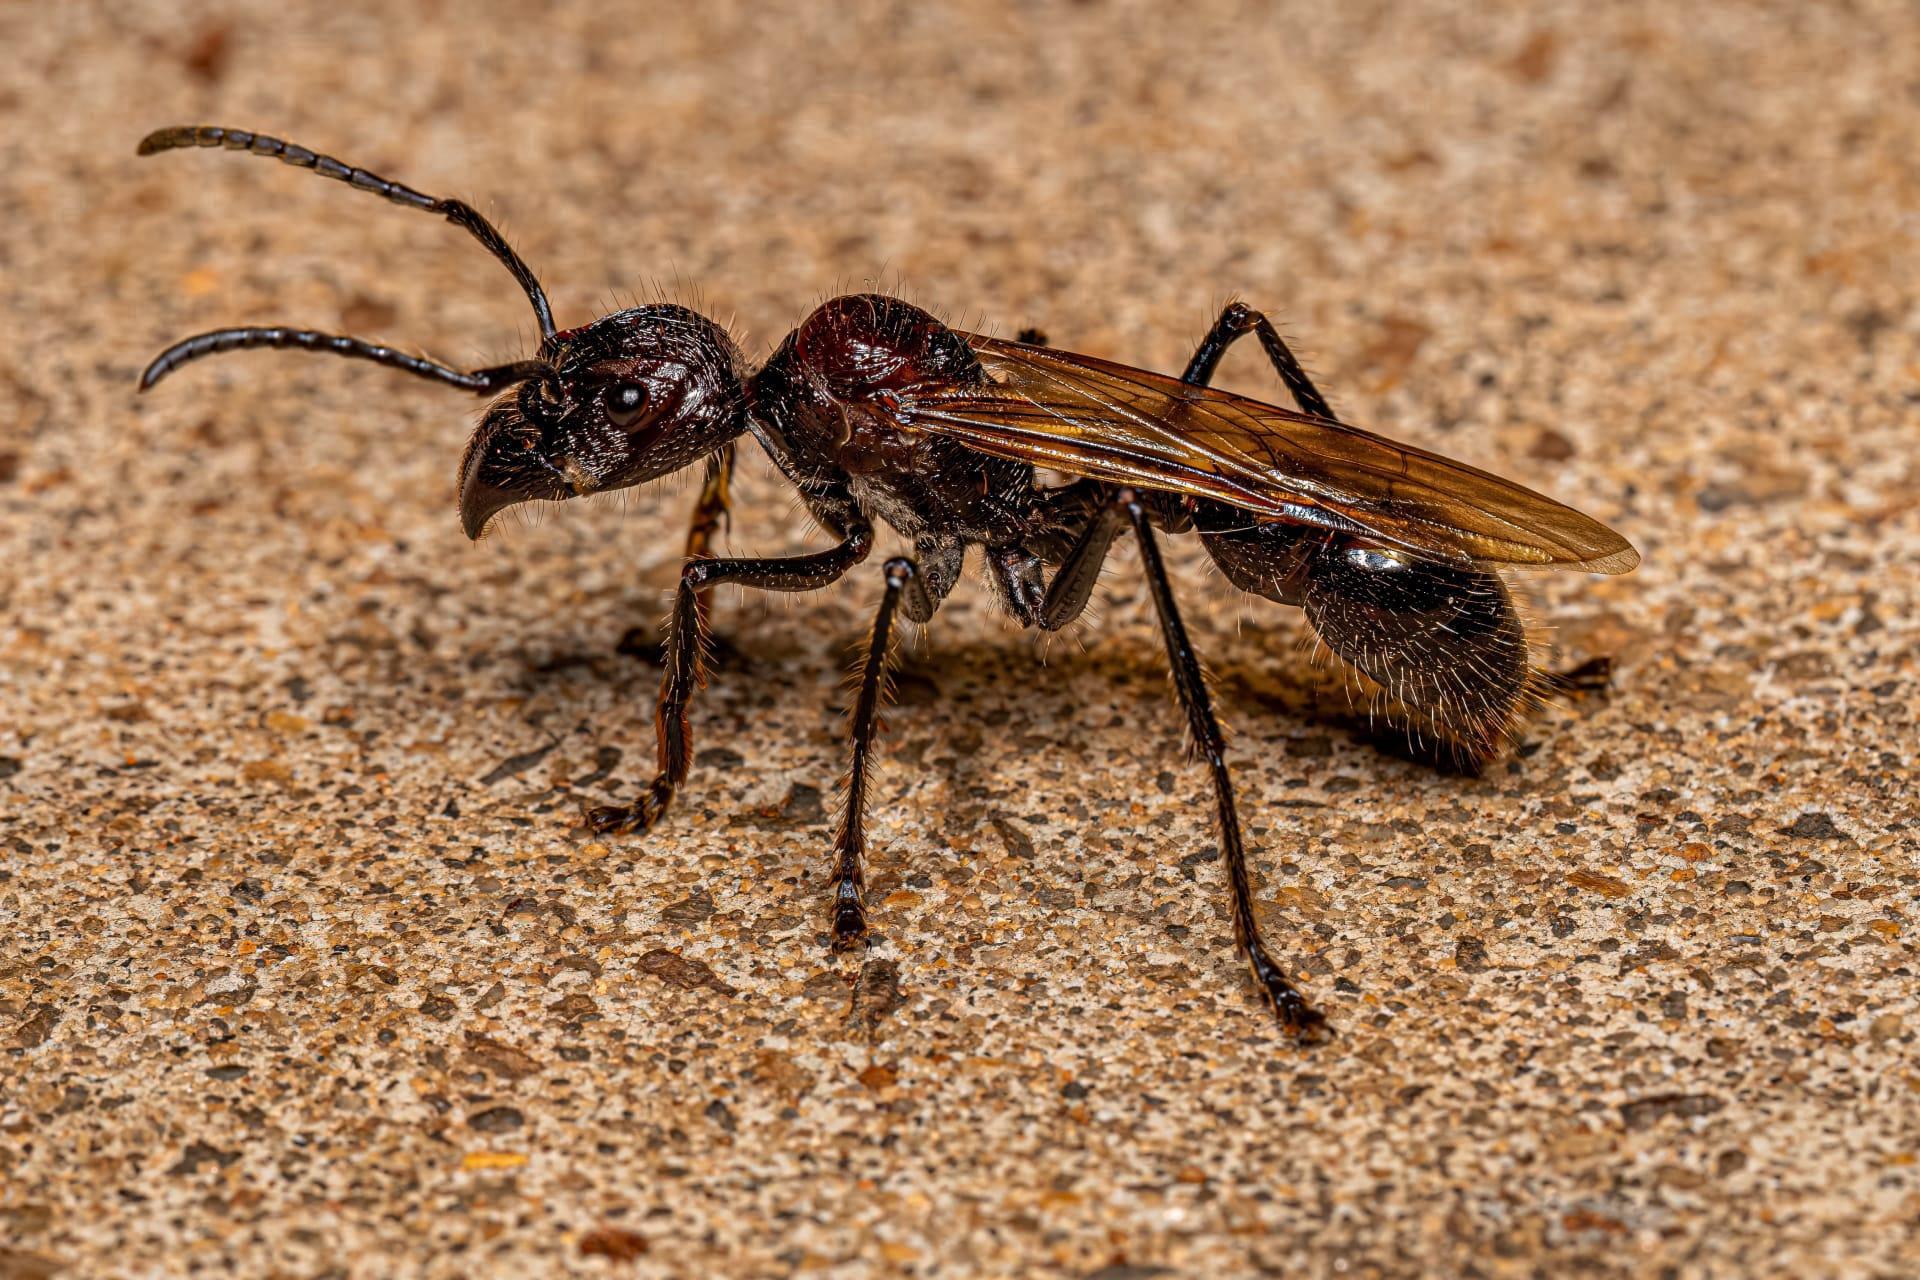 Bullet ant pictures